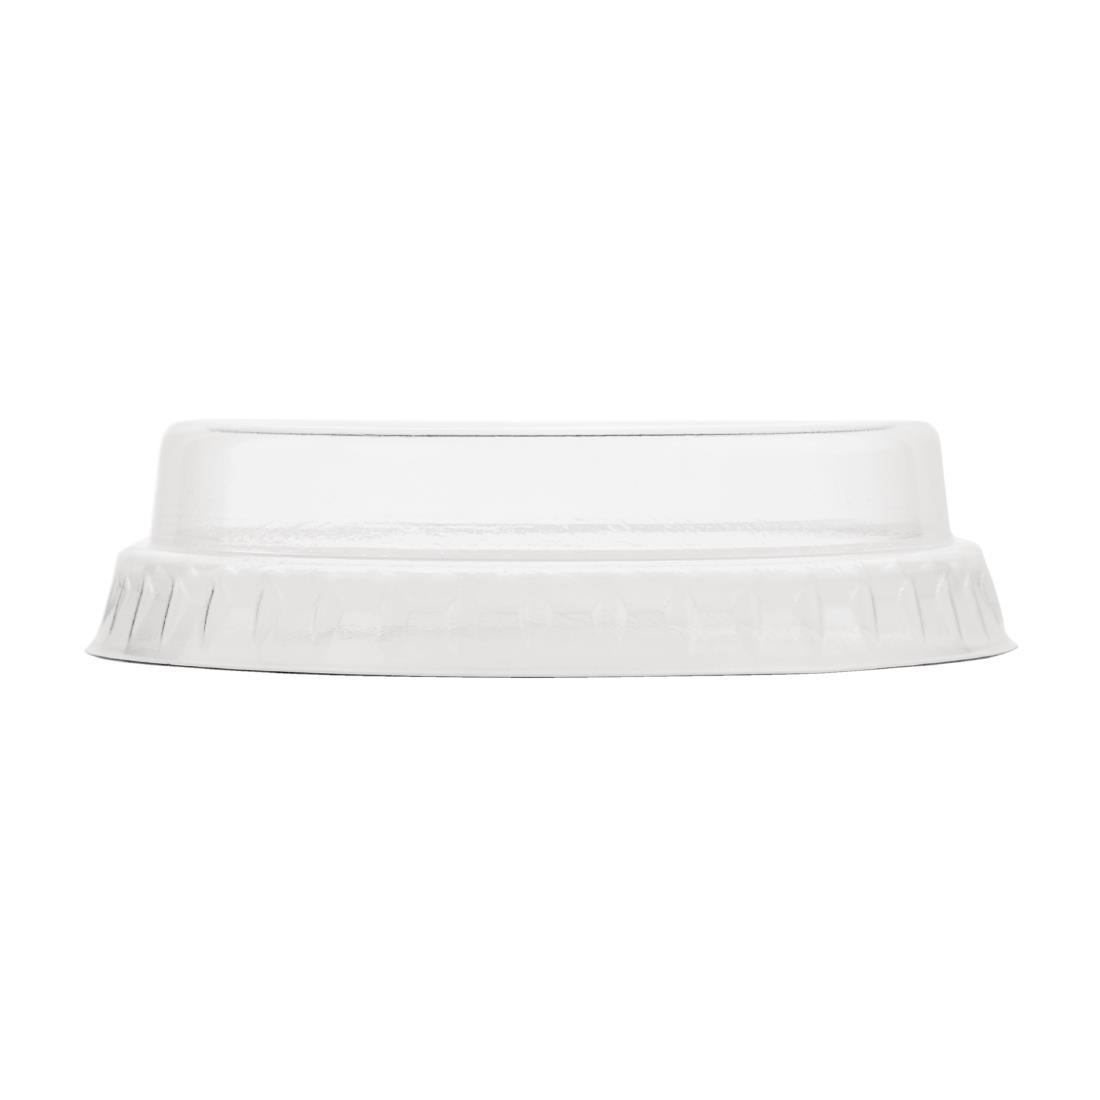 Vegware Compostable Flat Lids With No Hole 200ml / 7oz (Pack of 1000) - CL701  - 1